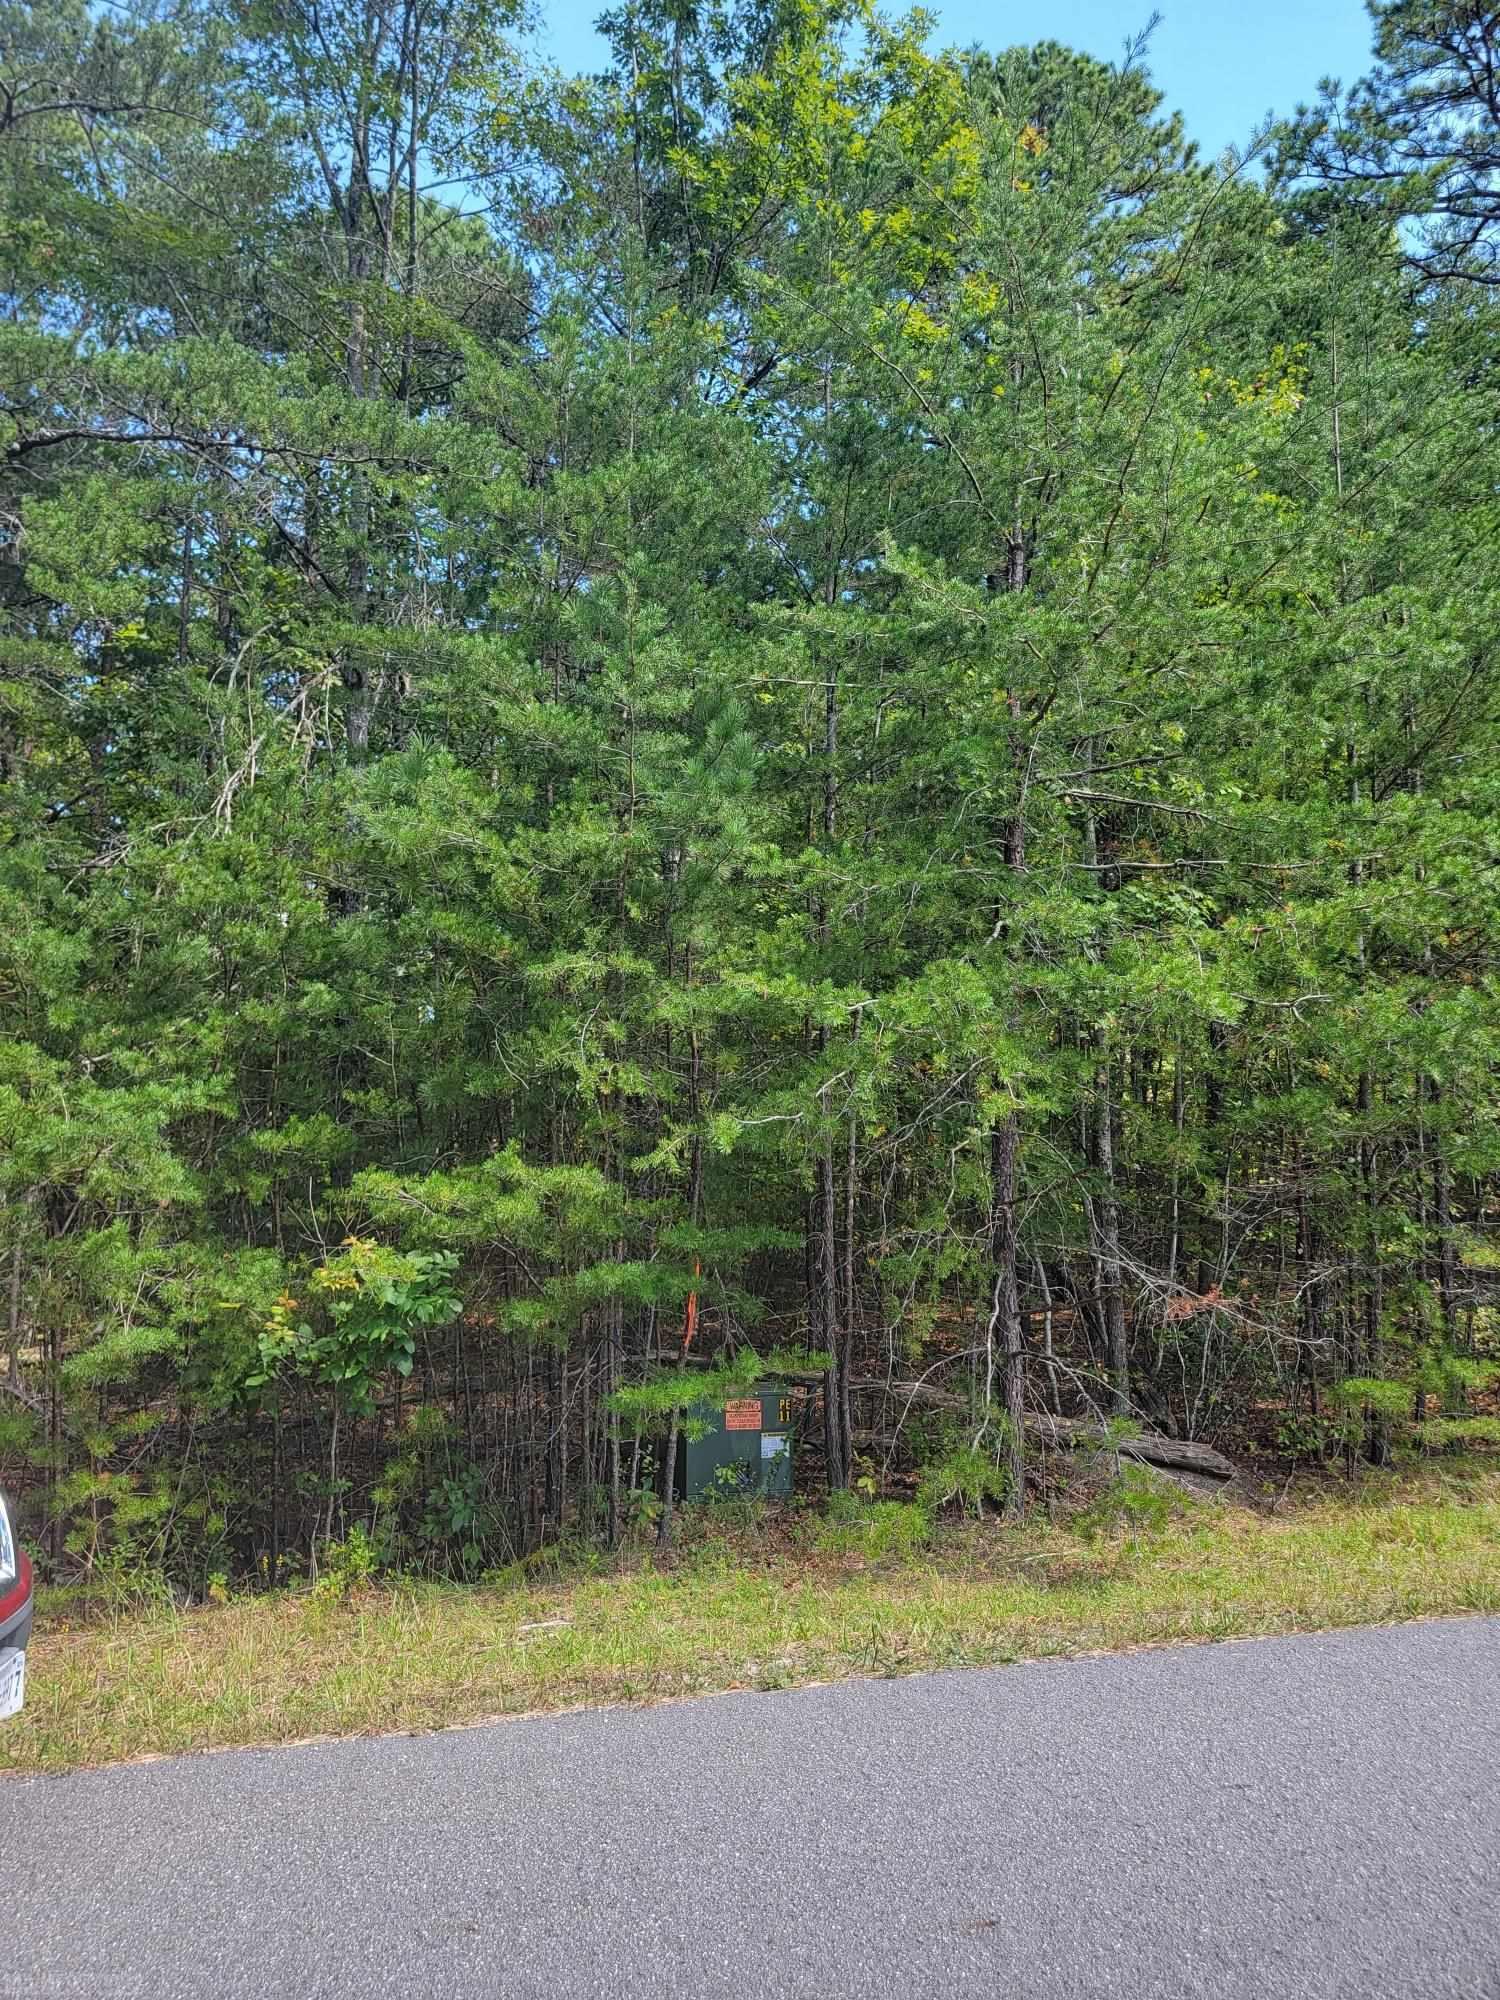 Worthy of your dream home, offering a peaceful retreat! This 3.759 acre lot is in an ideal location for a commute to Blacksburg or Roanoke.